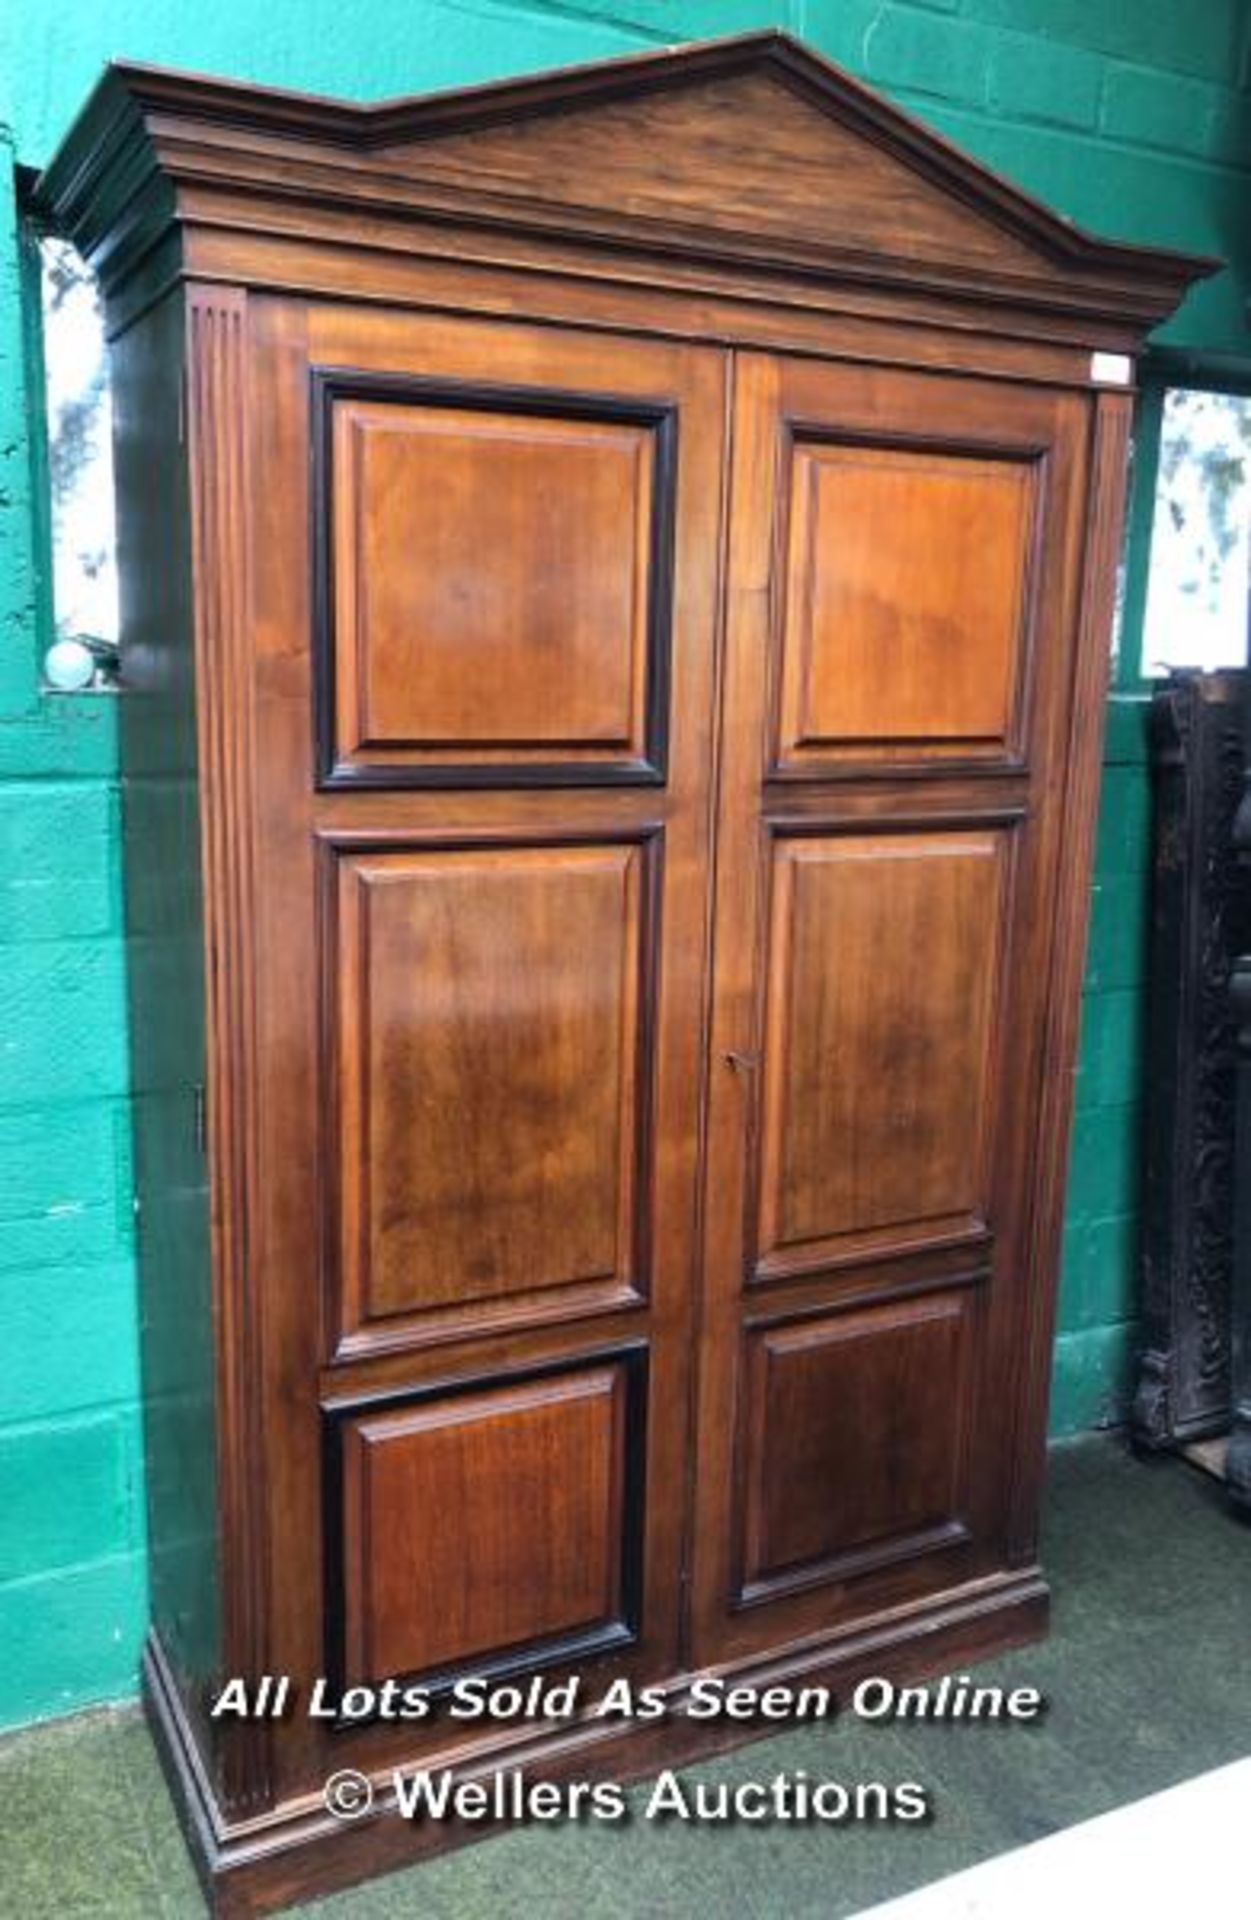 6 PANEL BILLIARD CUE STORAGE CUPBOARD FOR 18 CUES WITH RAISED PEDIMENT (CUES NOT INCLUDED), THERE IS